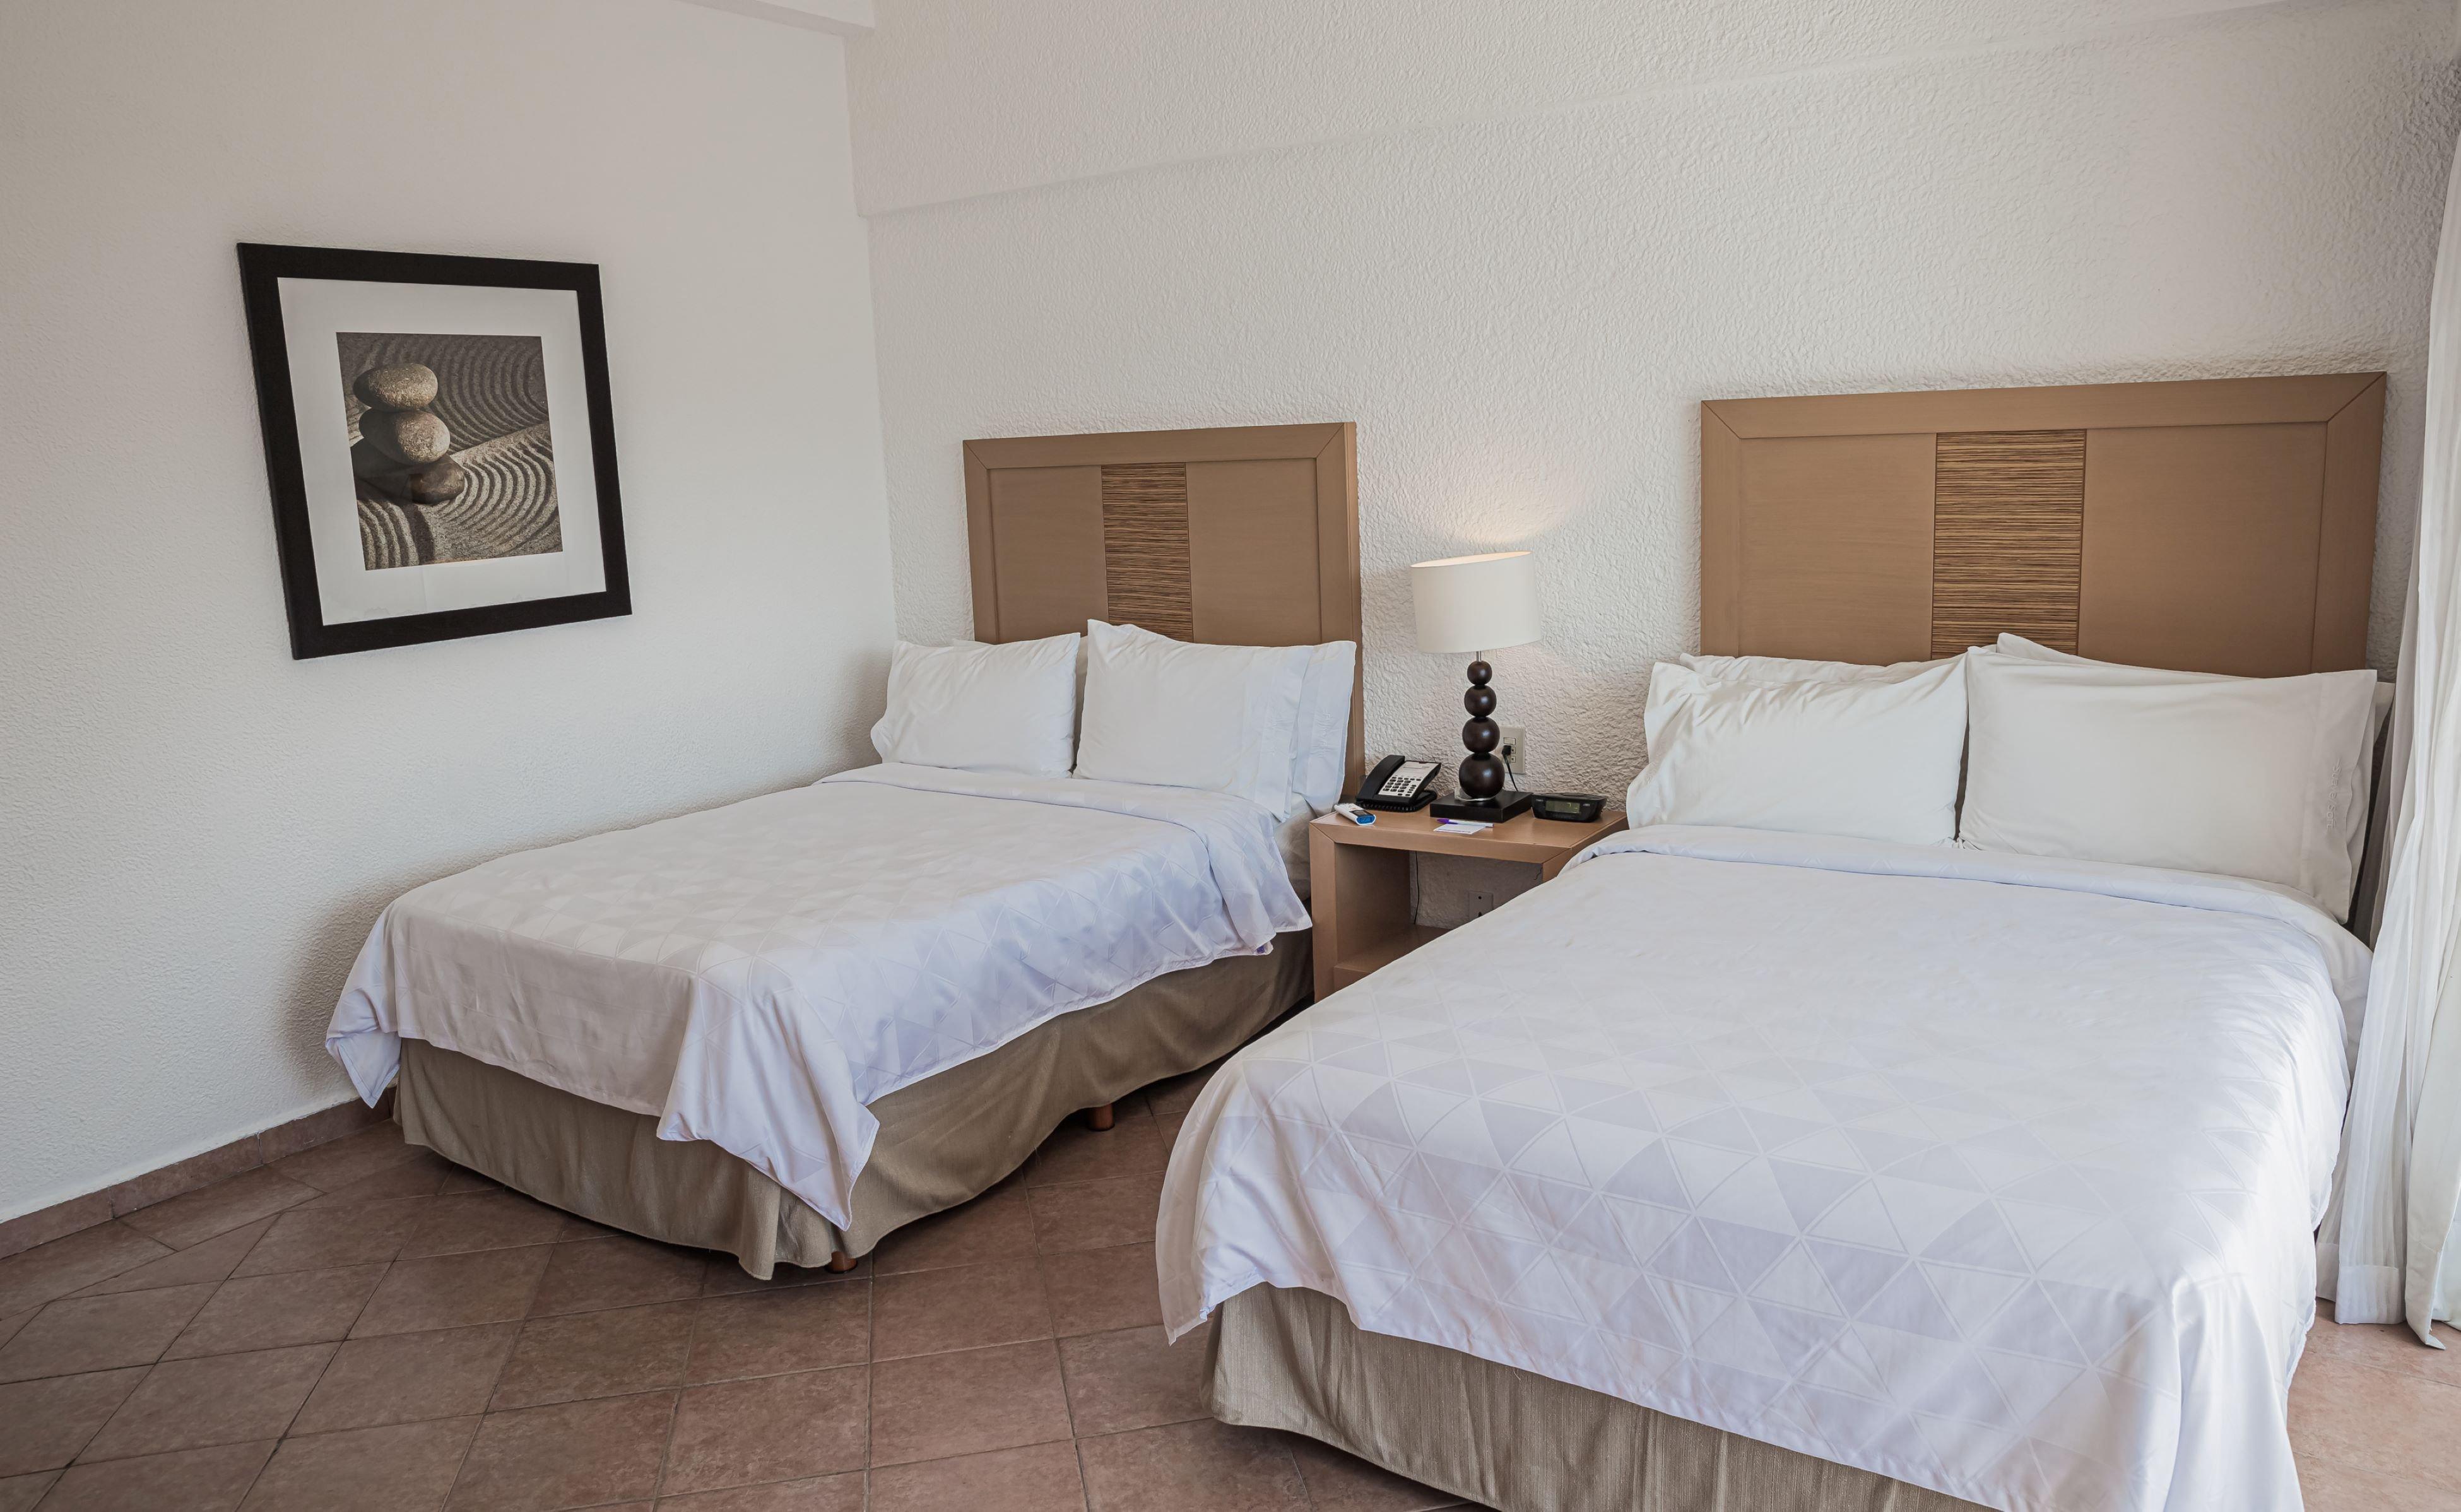 HOLIDAY INN RESORT ACAPULCO, AN IHG HOTEL ACAPULCO 4* (Mexico) - from US$  48 | BOOKED